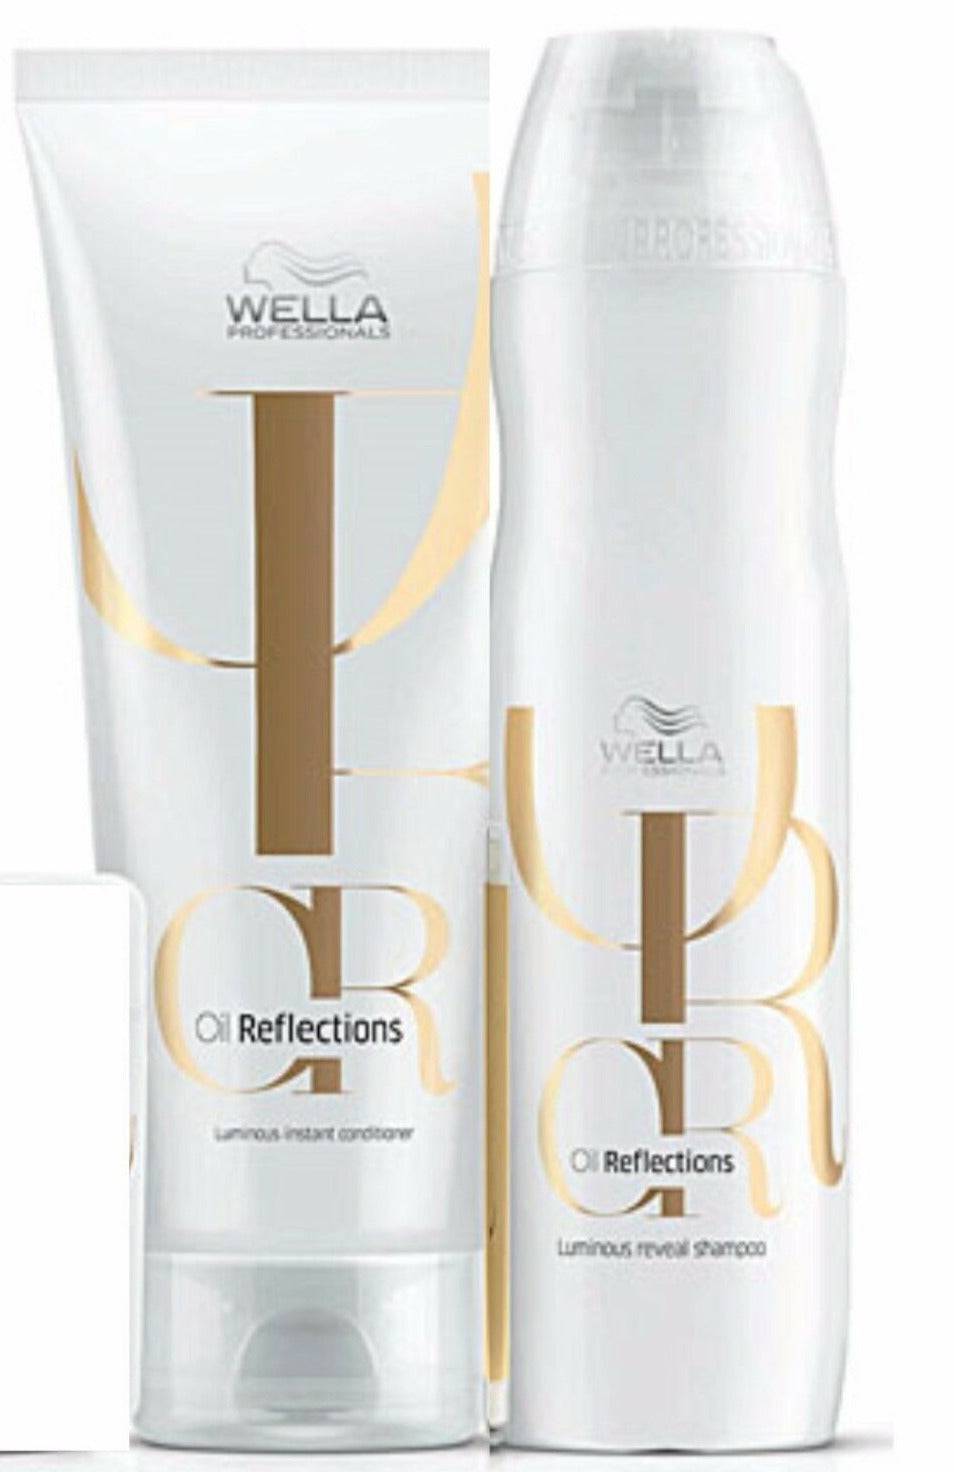 Wella Professionals Oil Reflections Duo Shampoo Conditioner - On Line Hair Depot